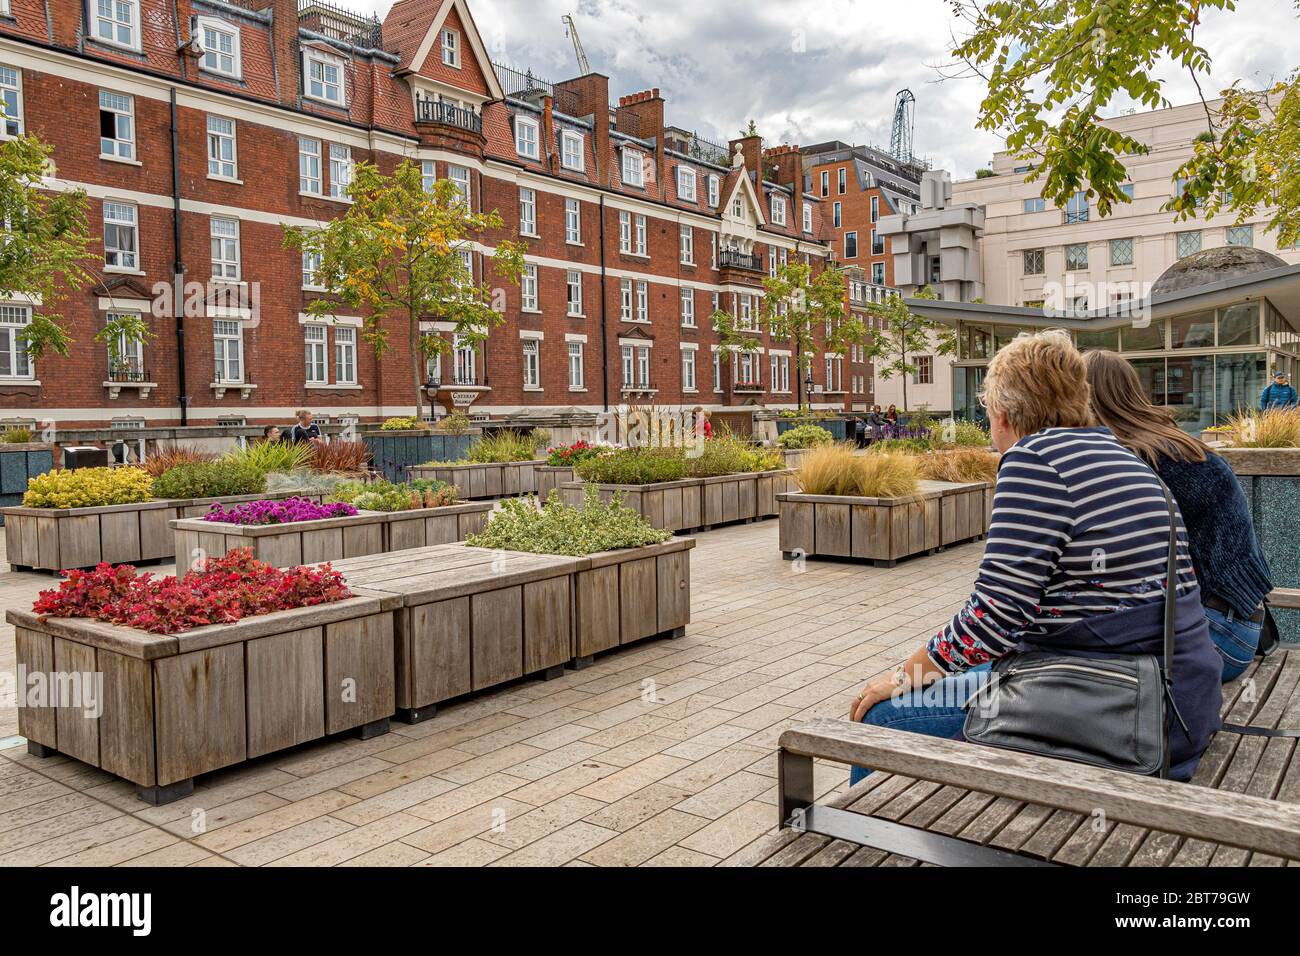 Brown Hart Gardens is a raised terraced garden in Mayfair, built in 1906 above the old Duke Street electricity substation ,Mayfair,London W1 Stock Photo